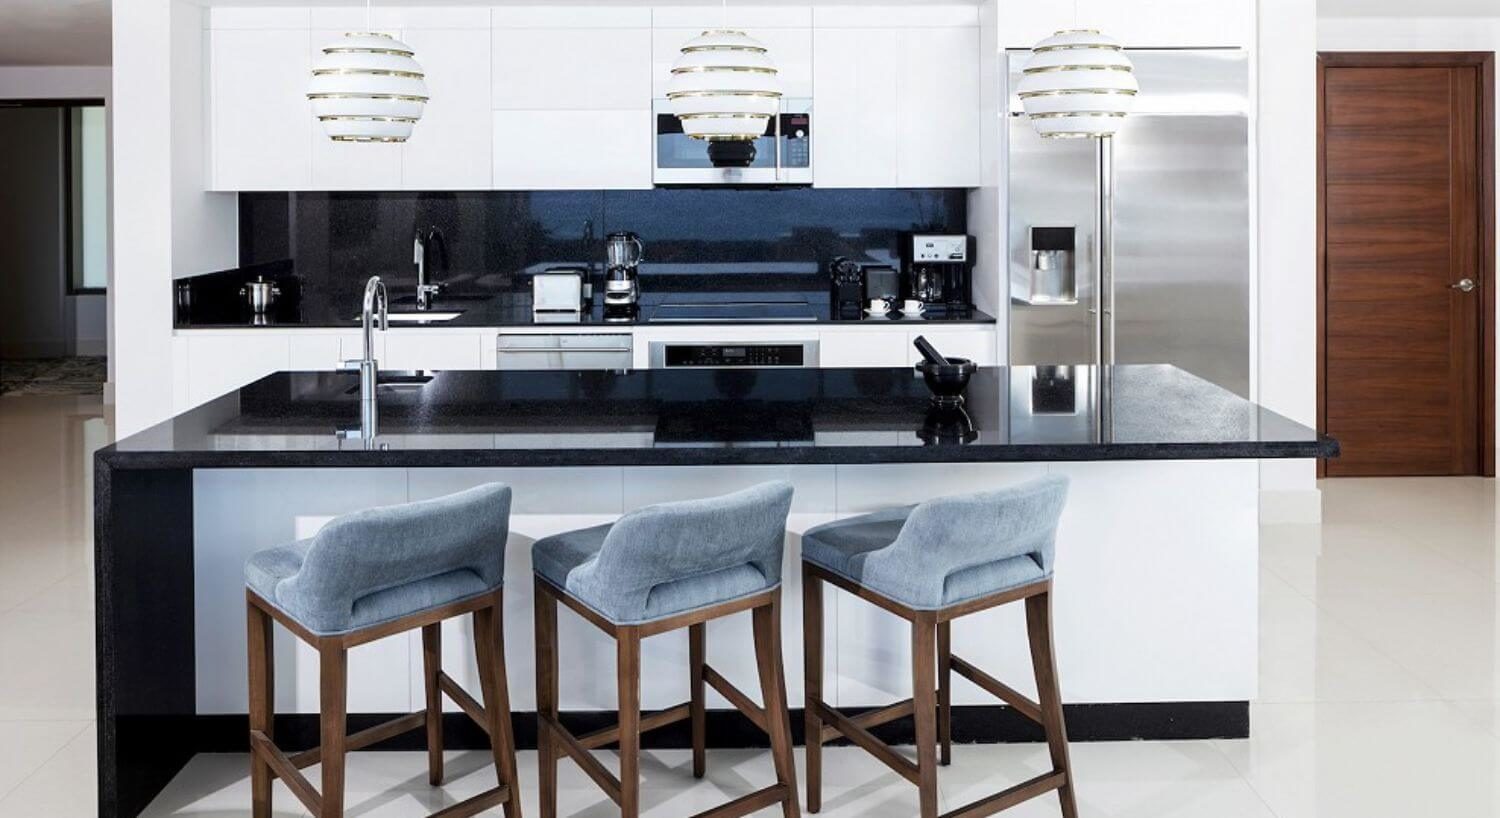 A gourmet kitchen with stainless steel appliance, sleek countertops, a breakfast bar, and bar stools.